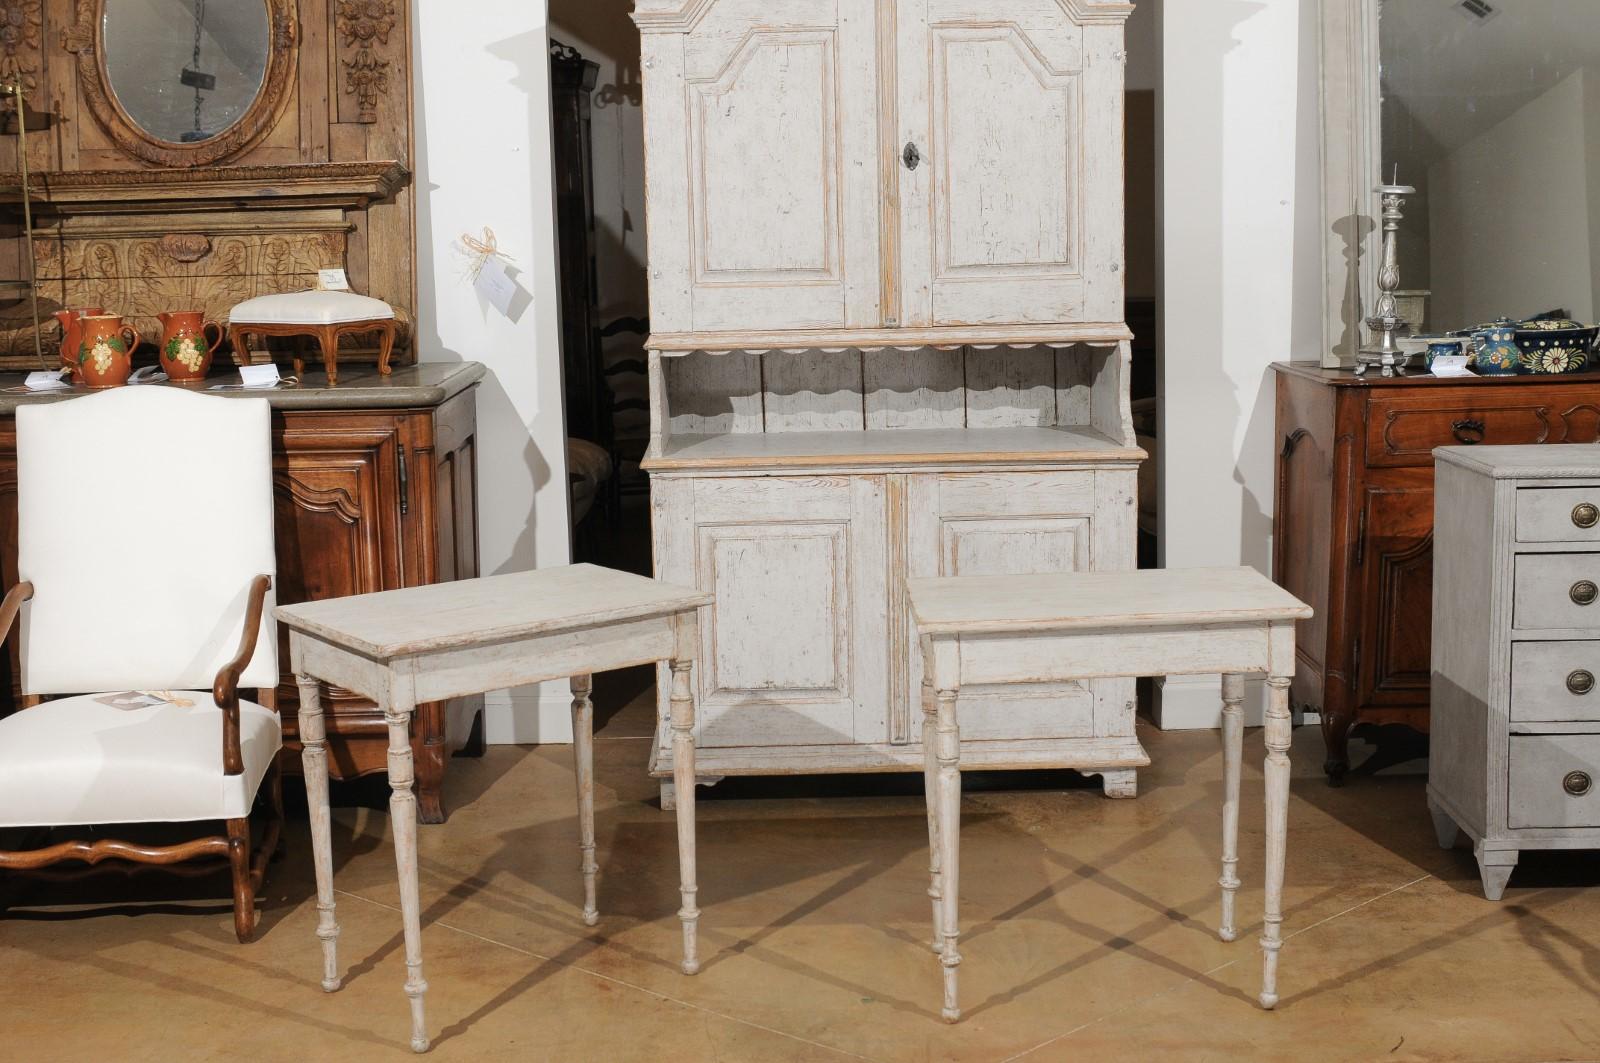 Painted Pair of Swedish 19th Century Tables with Turned Legs and Distressed Finish